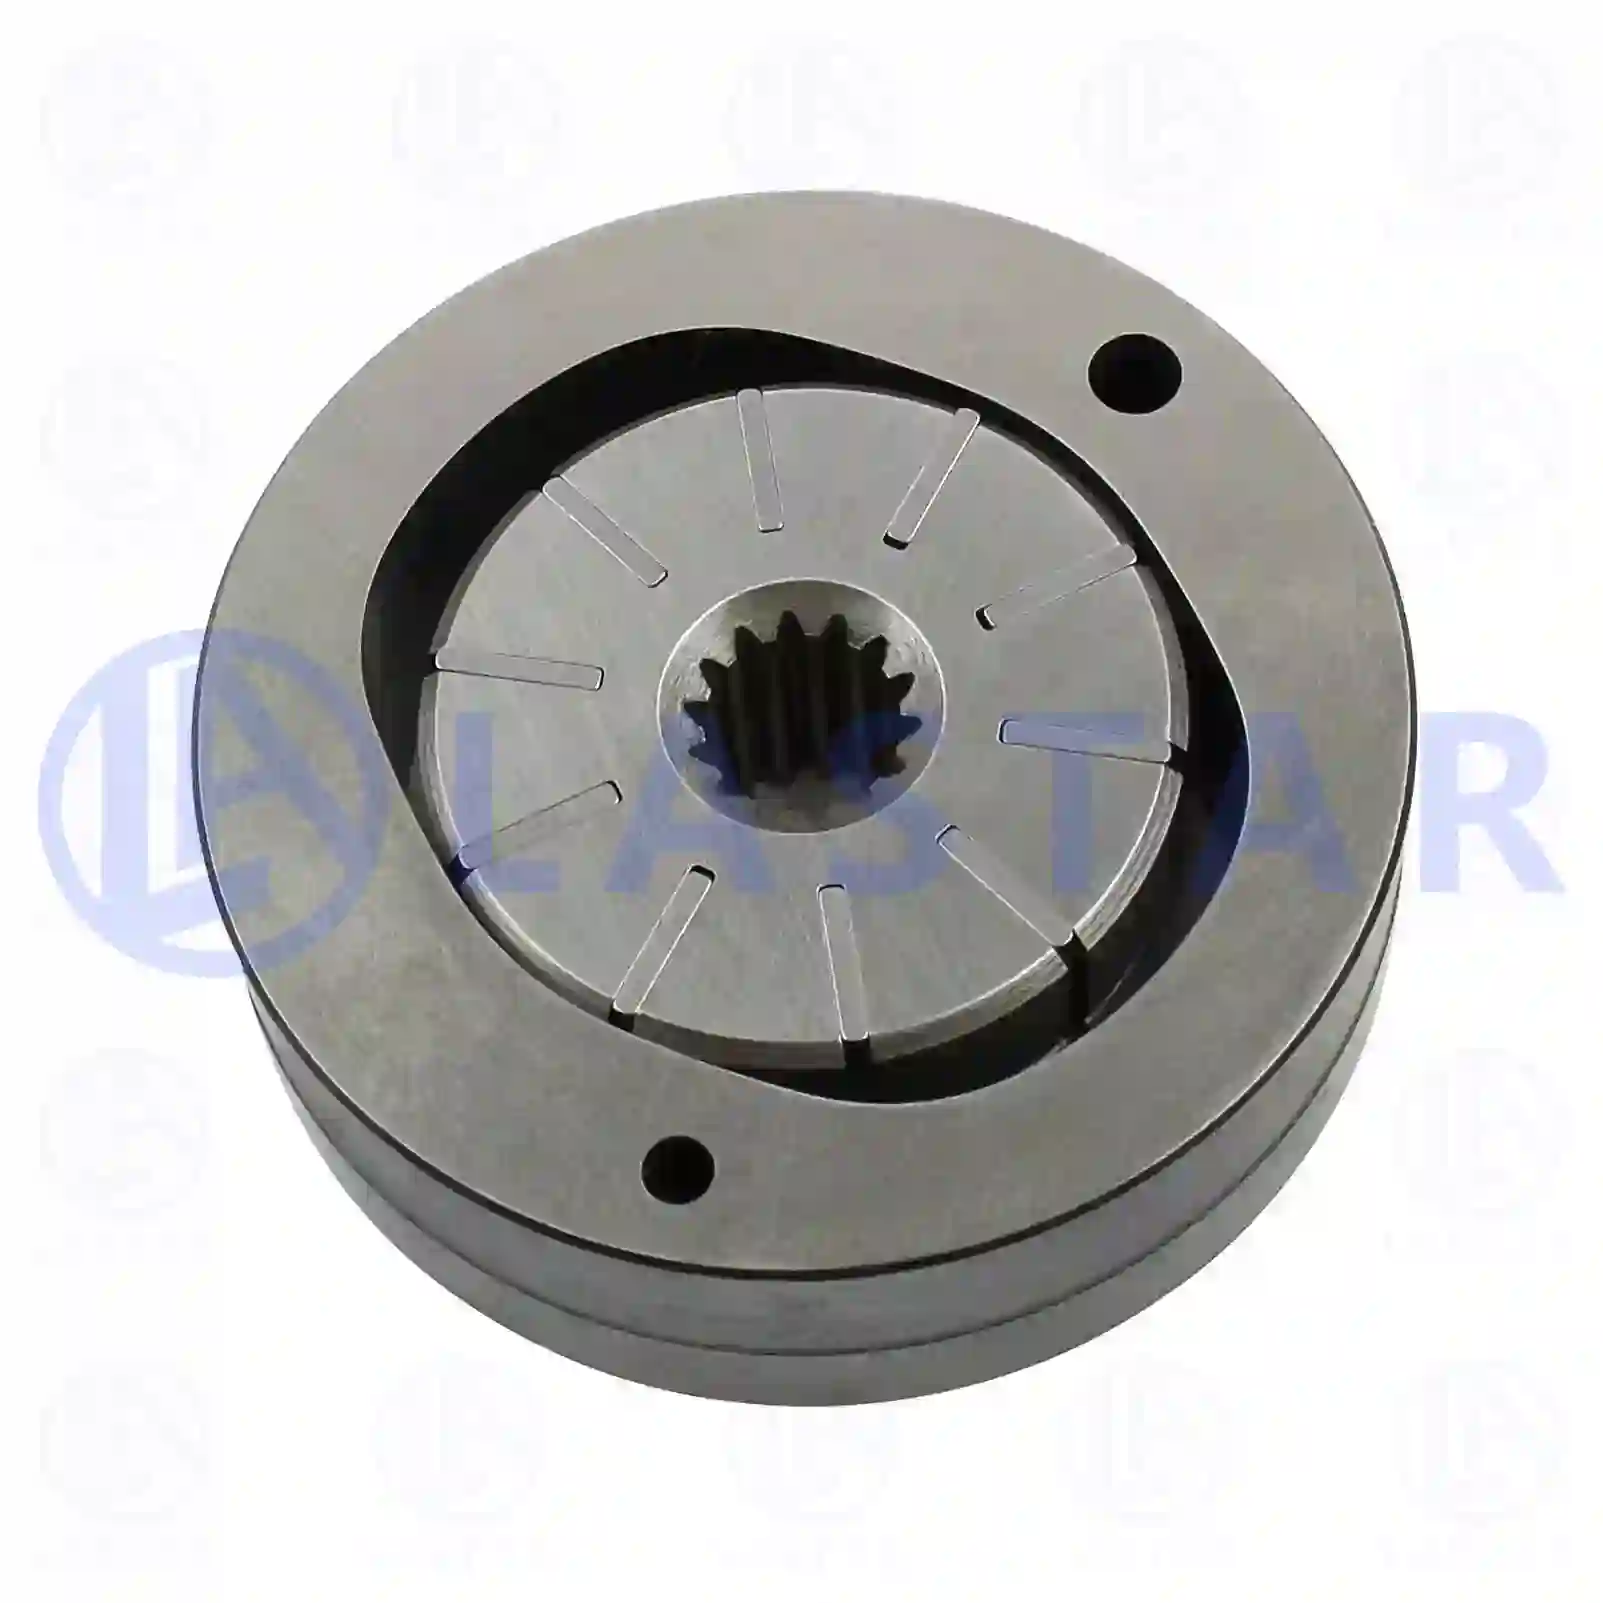 Rotor kit, 77705910, 1695595, 1699153, 3090417 ||  77705910 Lastar Spare Part | Truck Spare Parts, Auotomotive Spare Parts Rotor kit, 77705910, 1695595, 1699153, 3090417 ||  77705910 Lastar Spare Part | Truck Spare Parts, Auotomotive Spare Parts